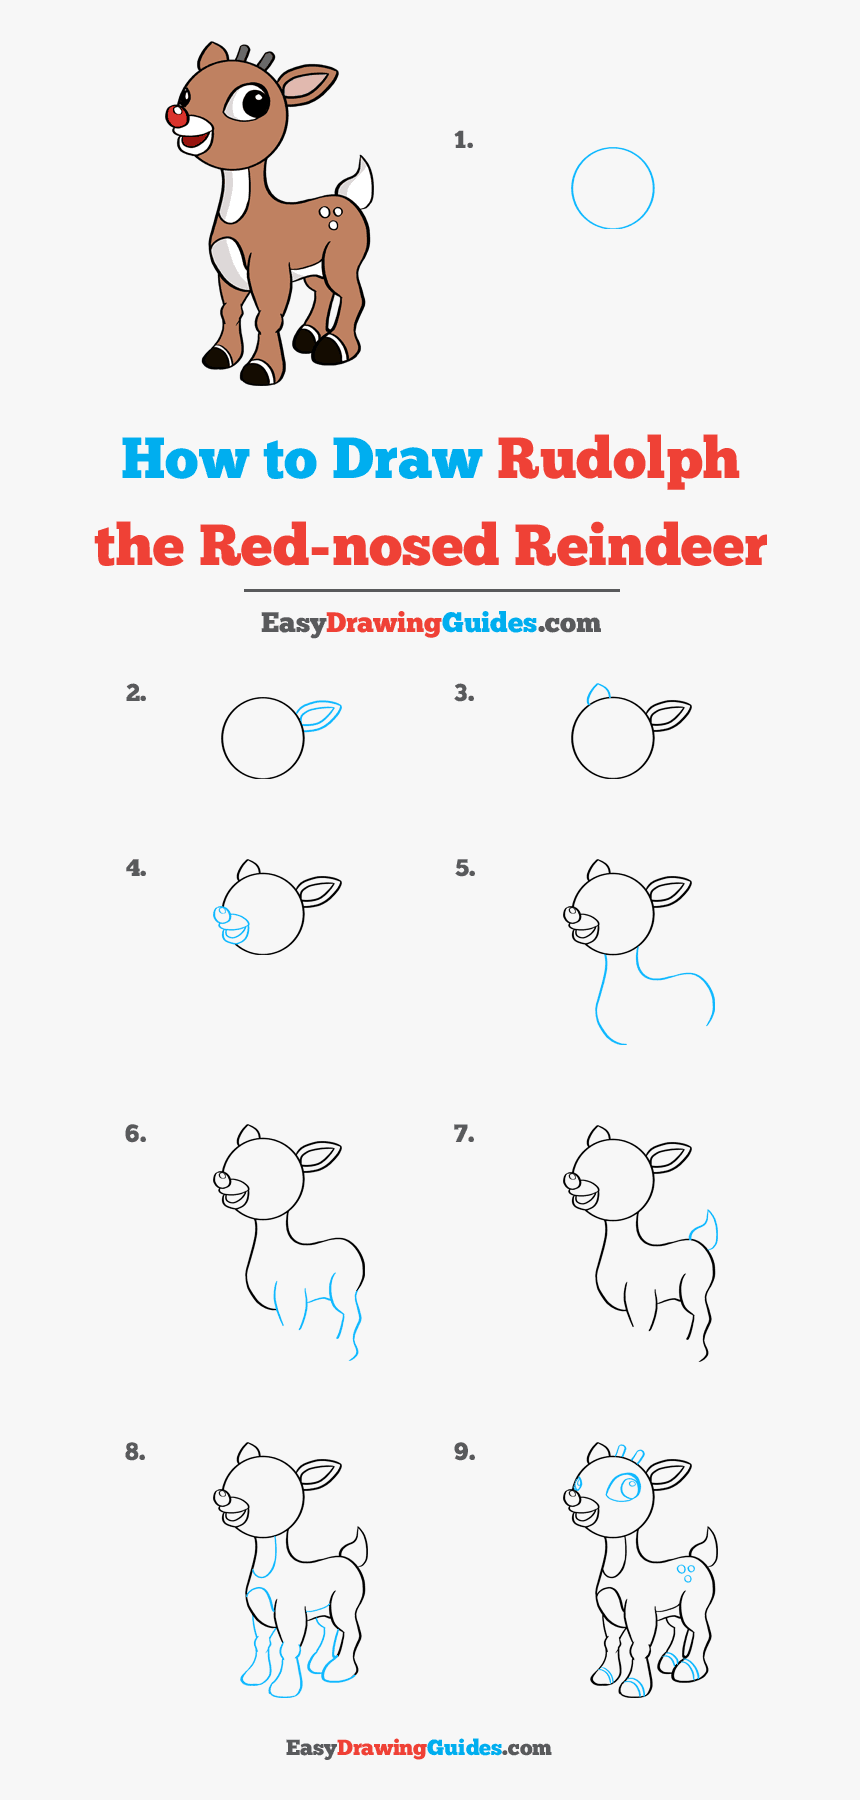 How To Draw Rudolph The Red-nosed Reindeer - Cartoon, HD Png Download, Free Download